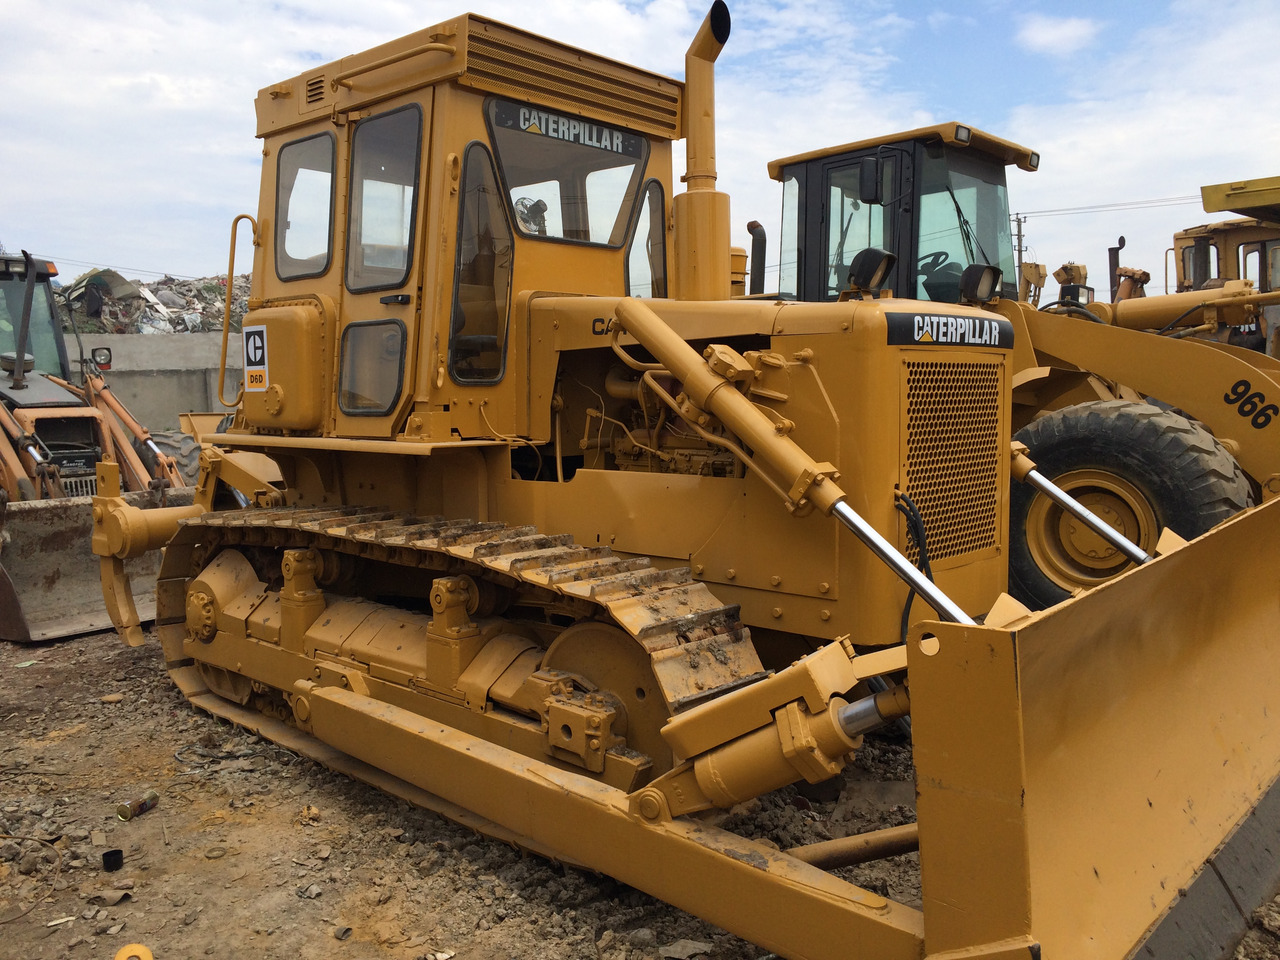 Bulldozer nuevo Famous brand CATERPILLAR used D6D in  good condition on sale: foto 6